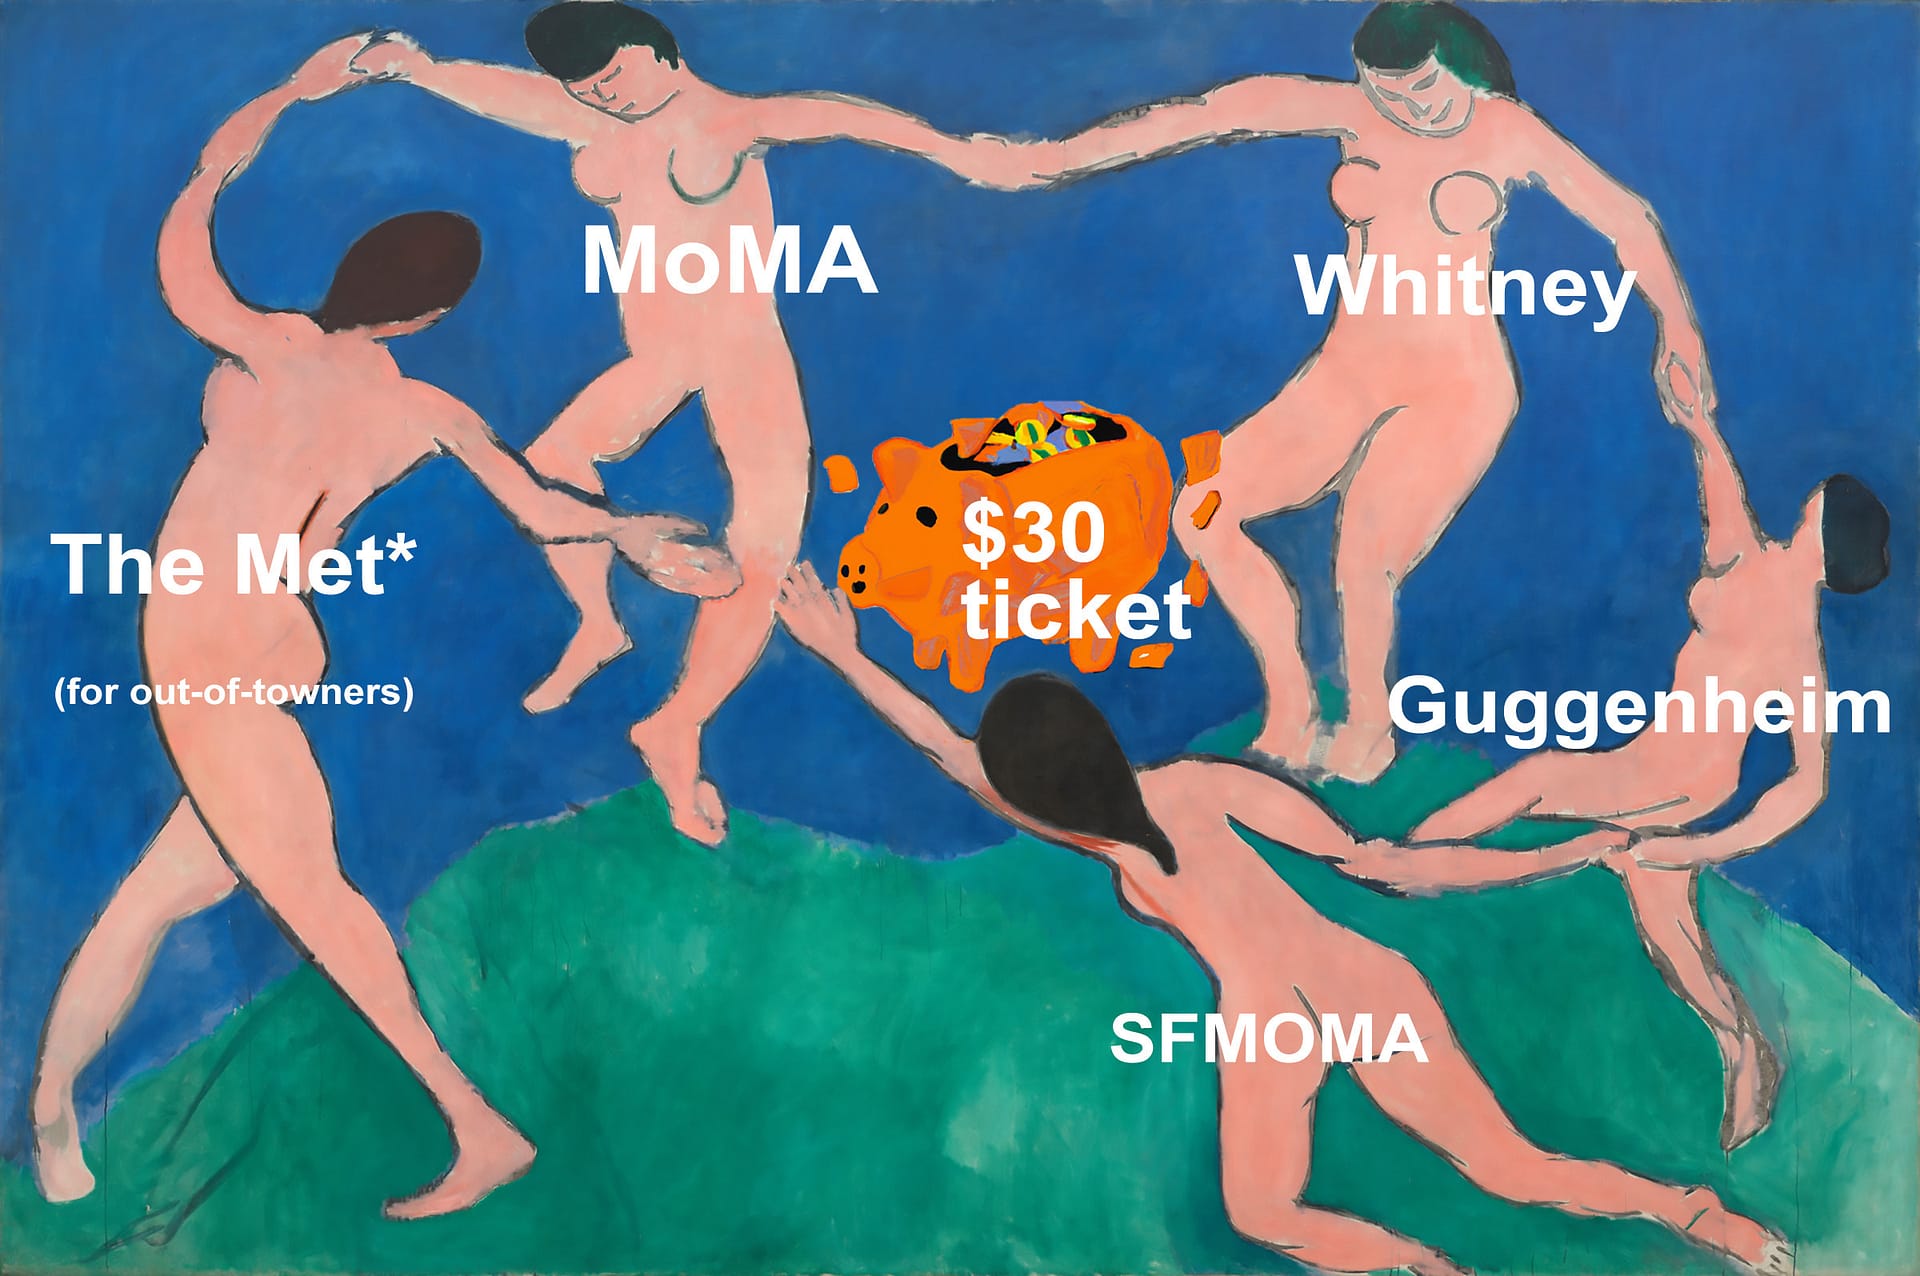 Want to Visit MoMA? That’ll Be $30